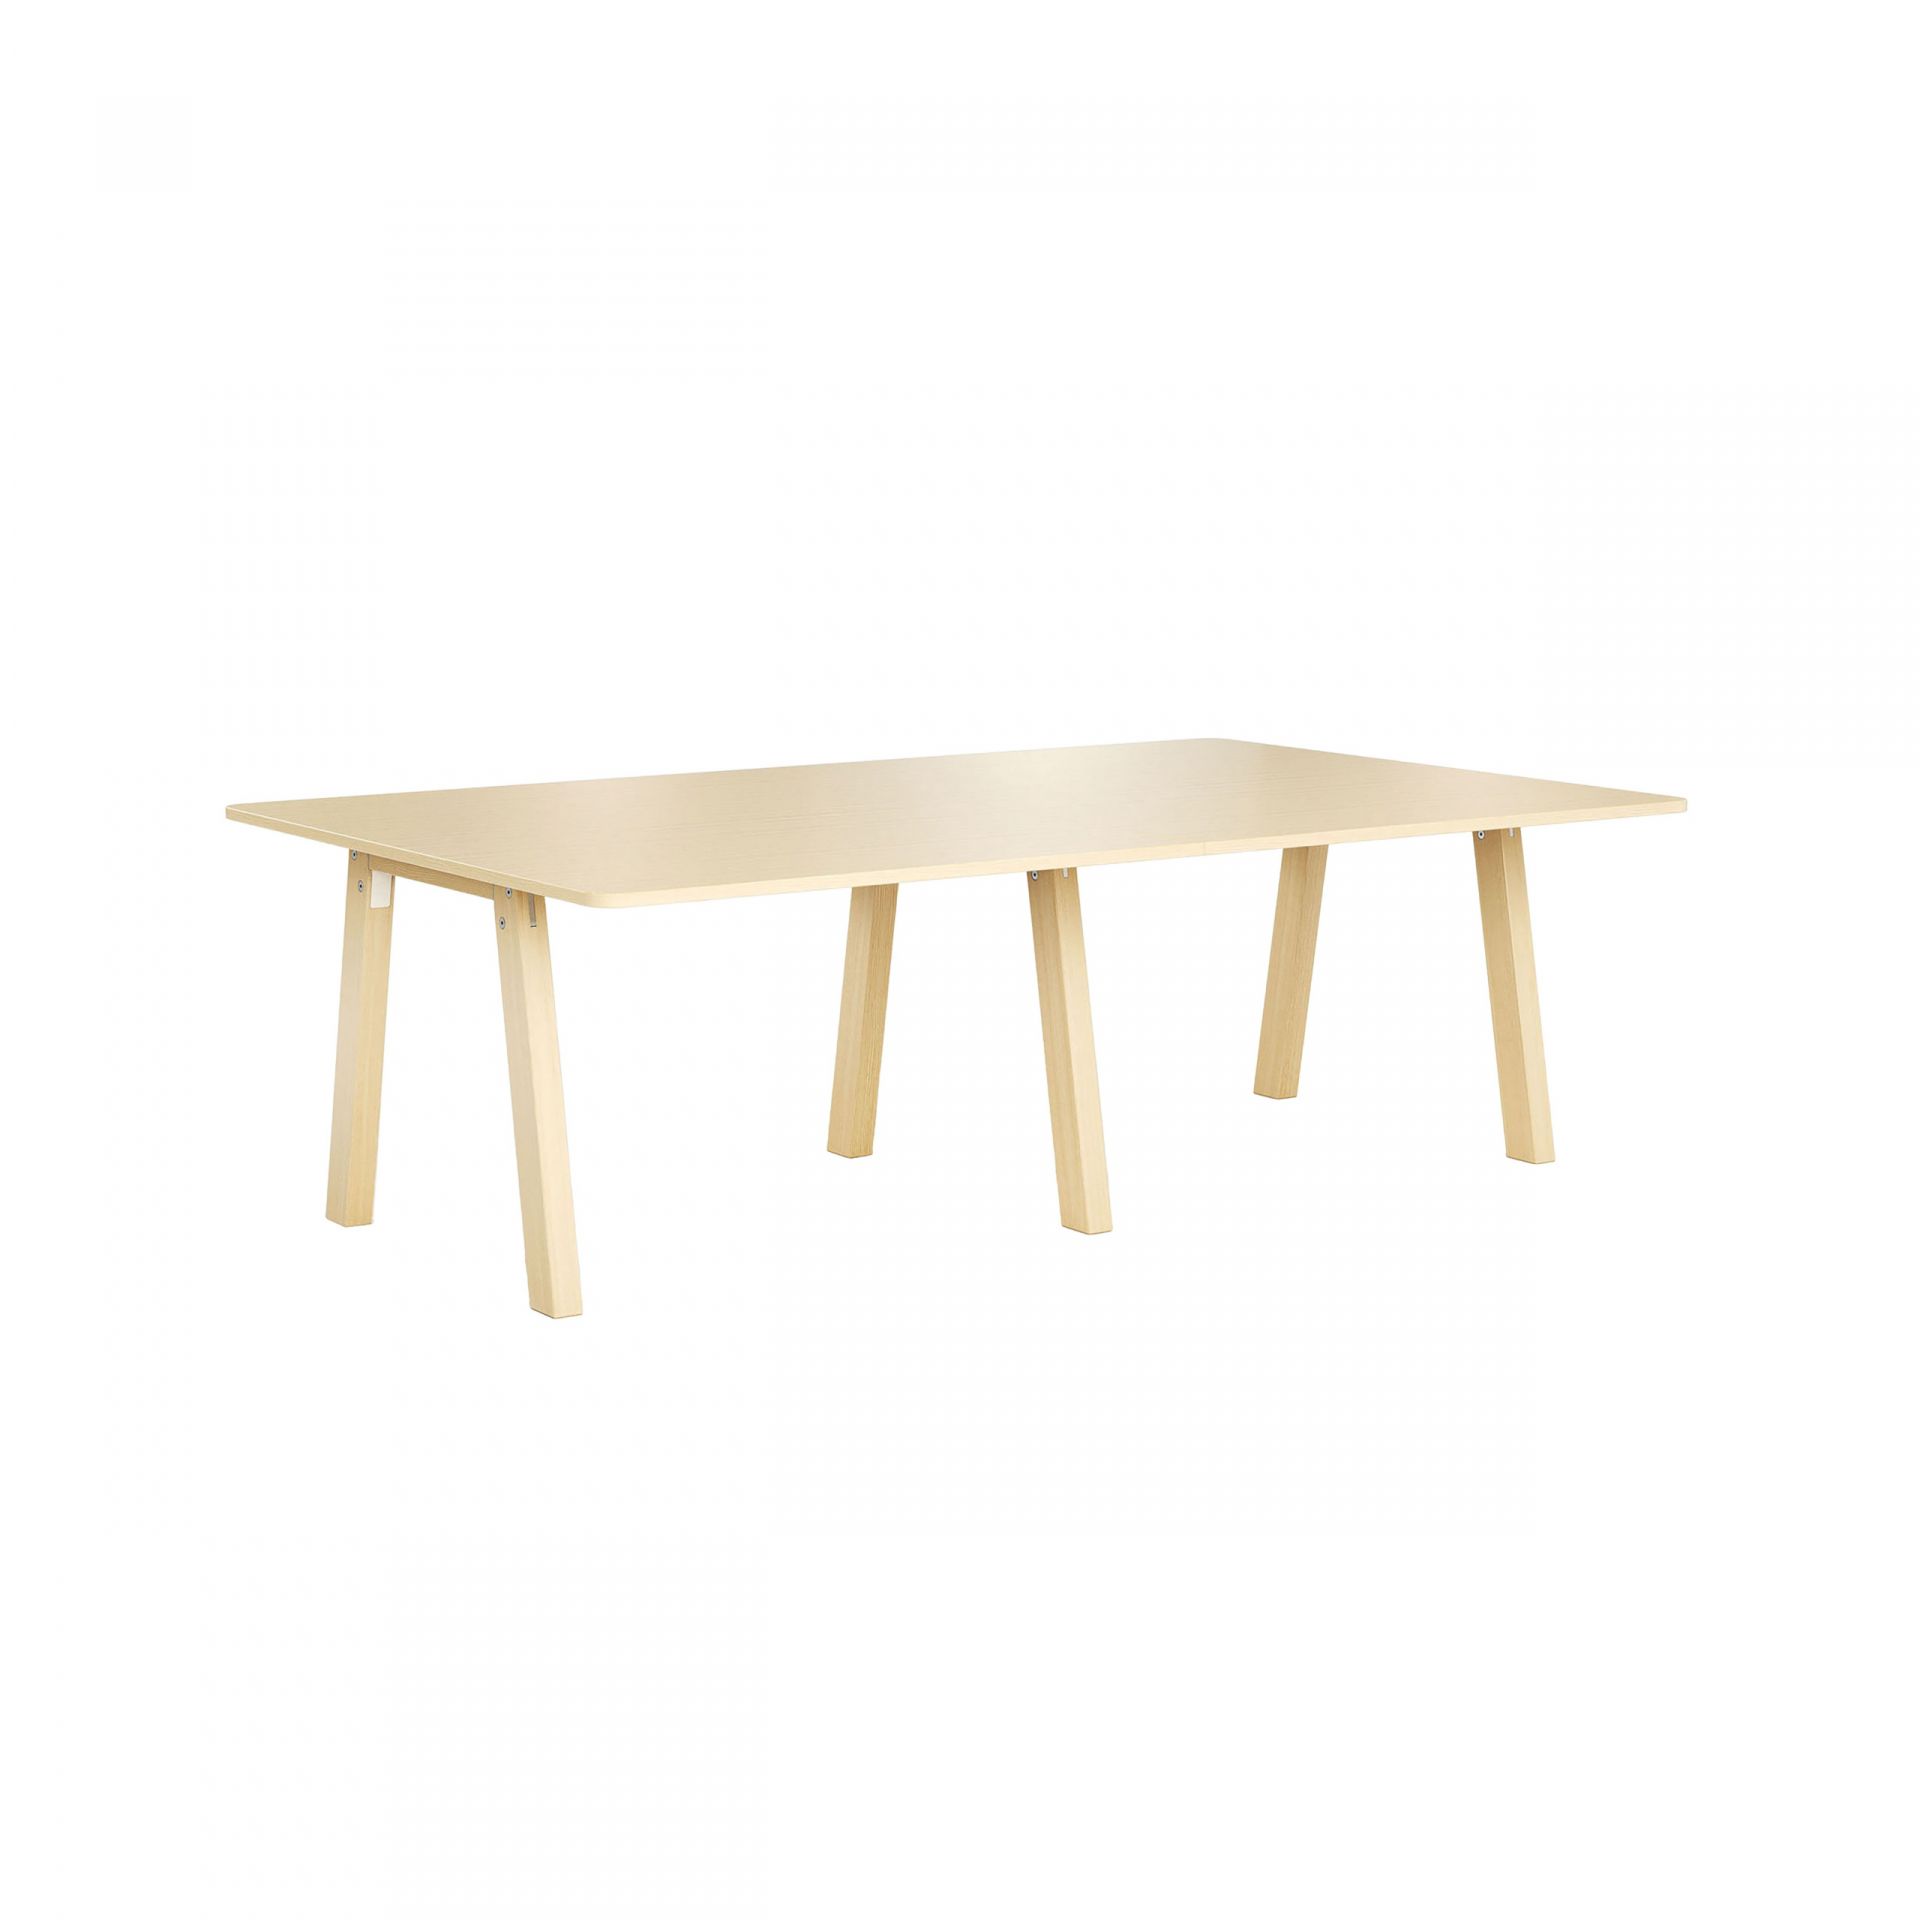 Collaborate Table with wooden legs product image 1